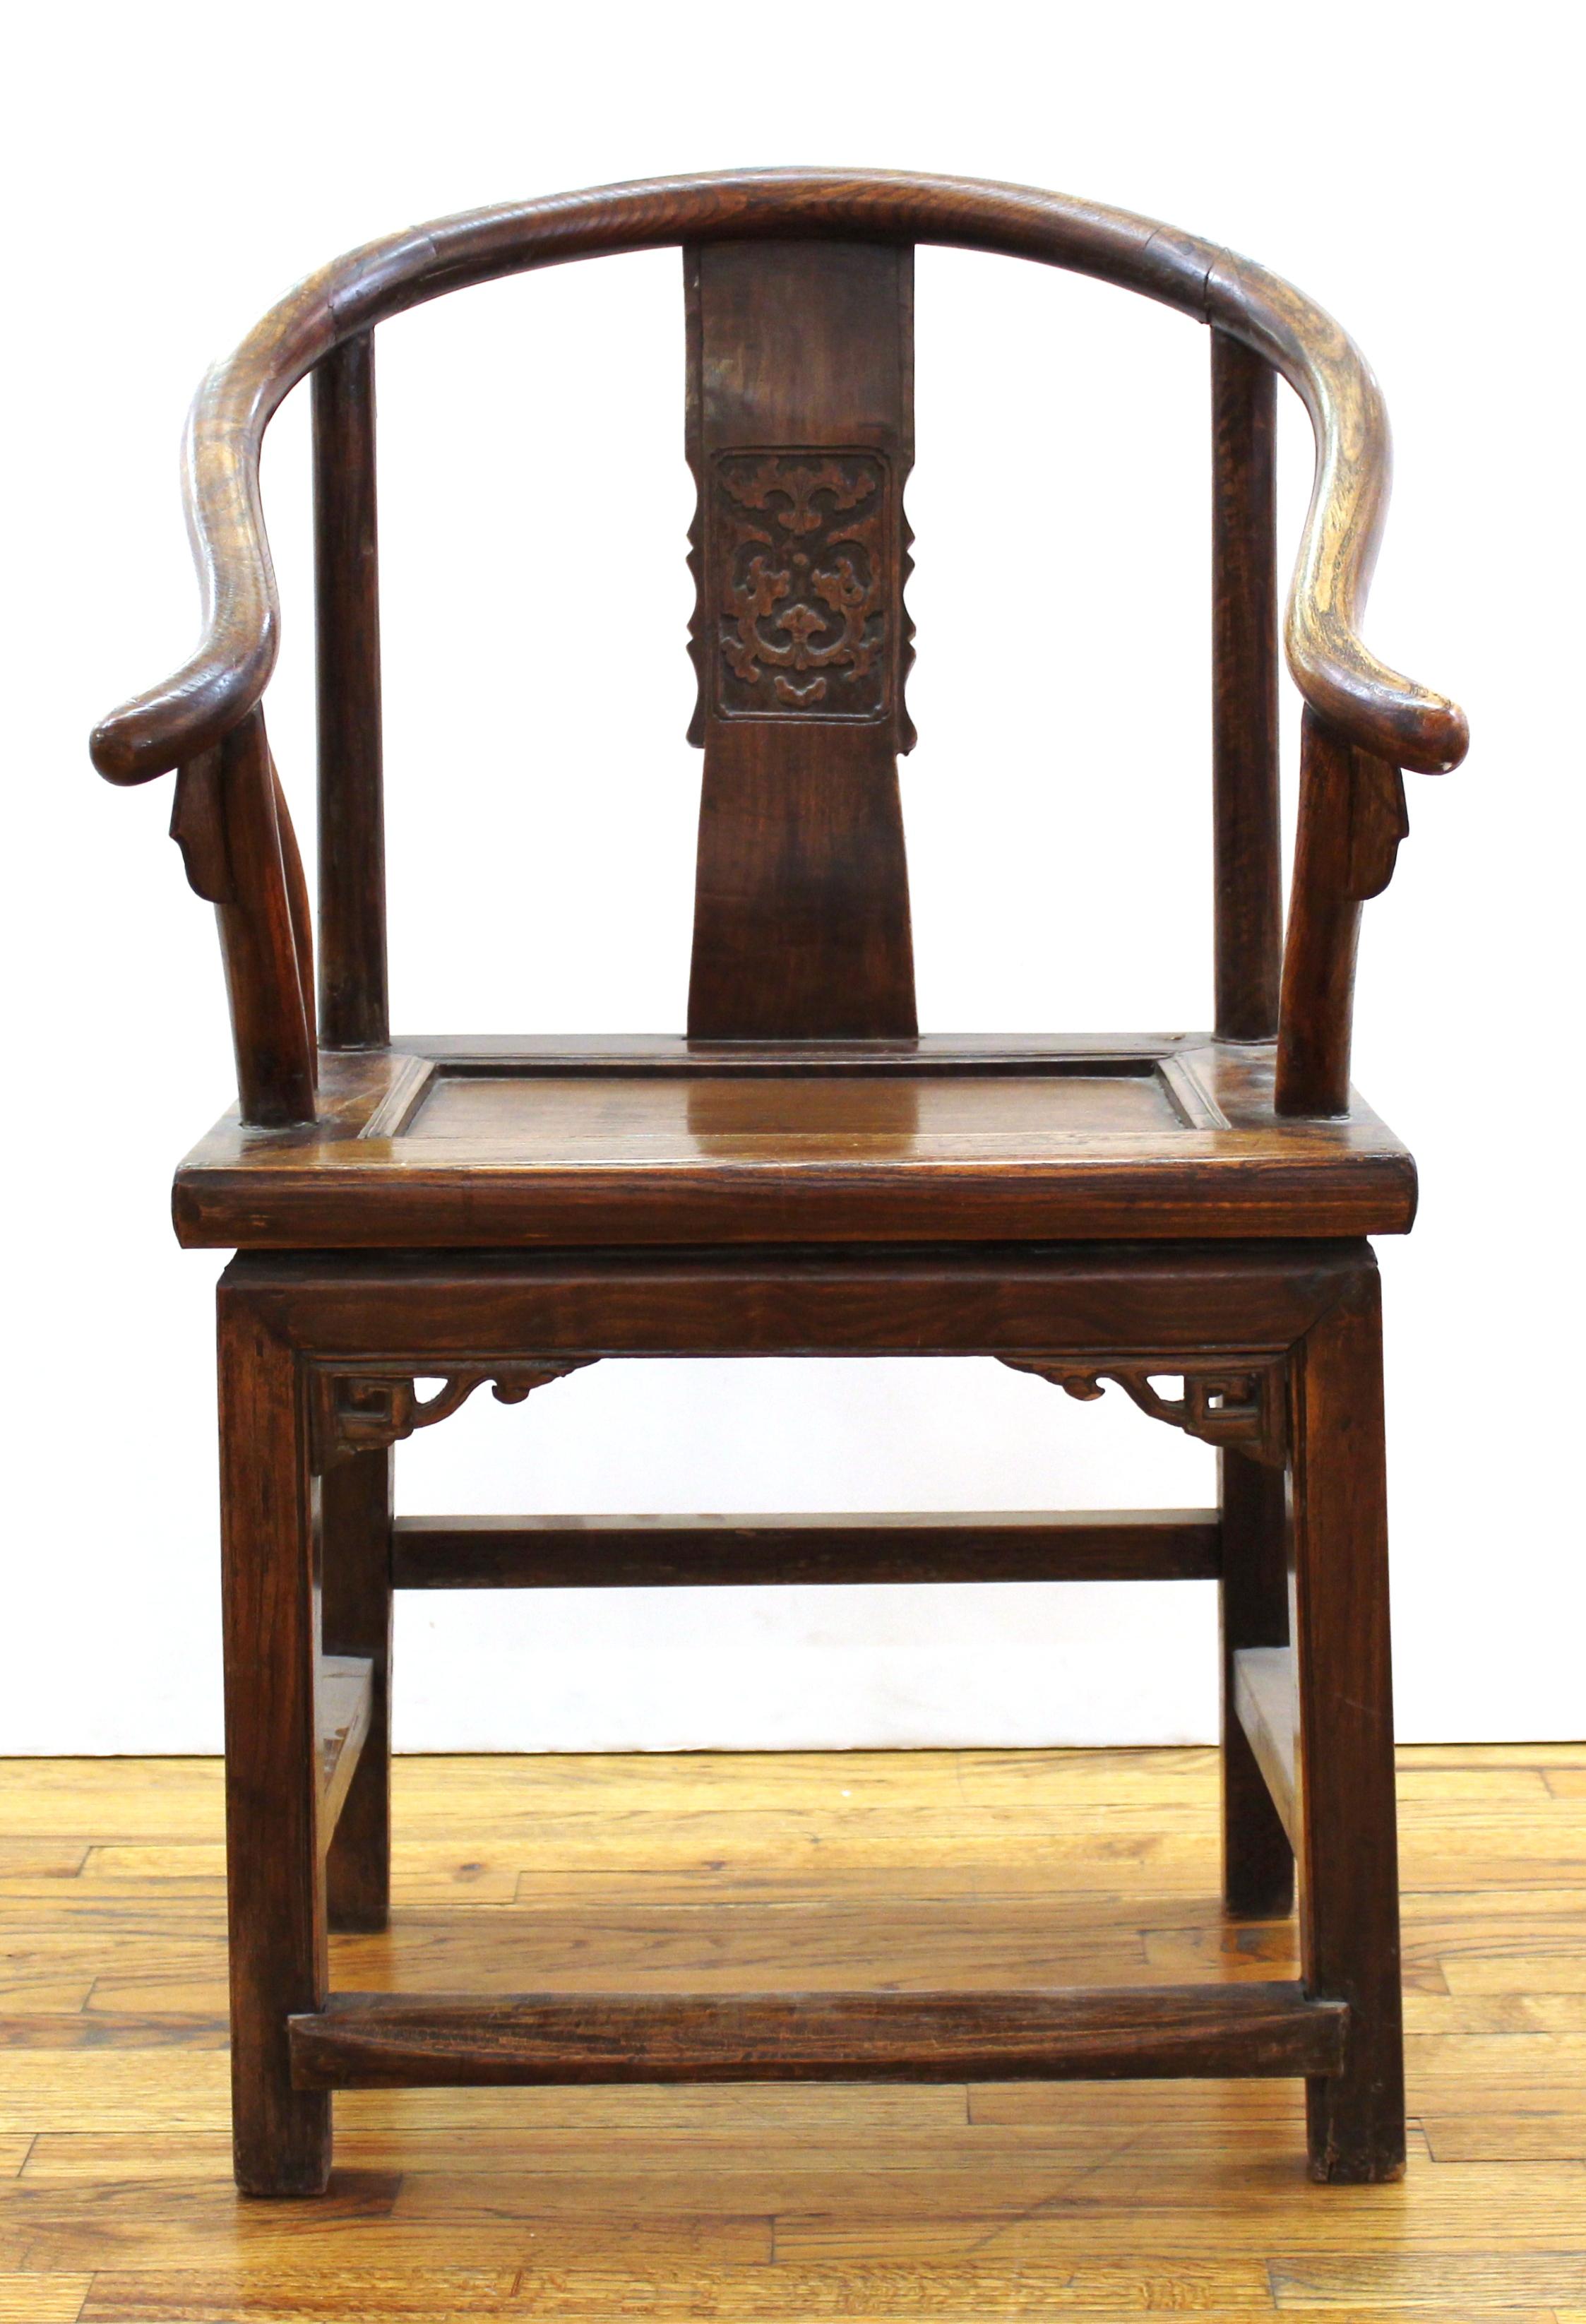 Chinese antique horseshoe back armchair in carved wood. Jian Ding export seal on back of seat.